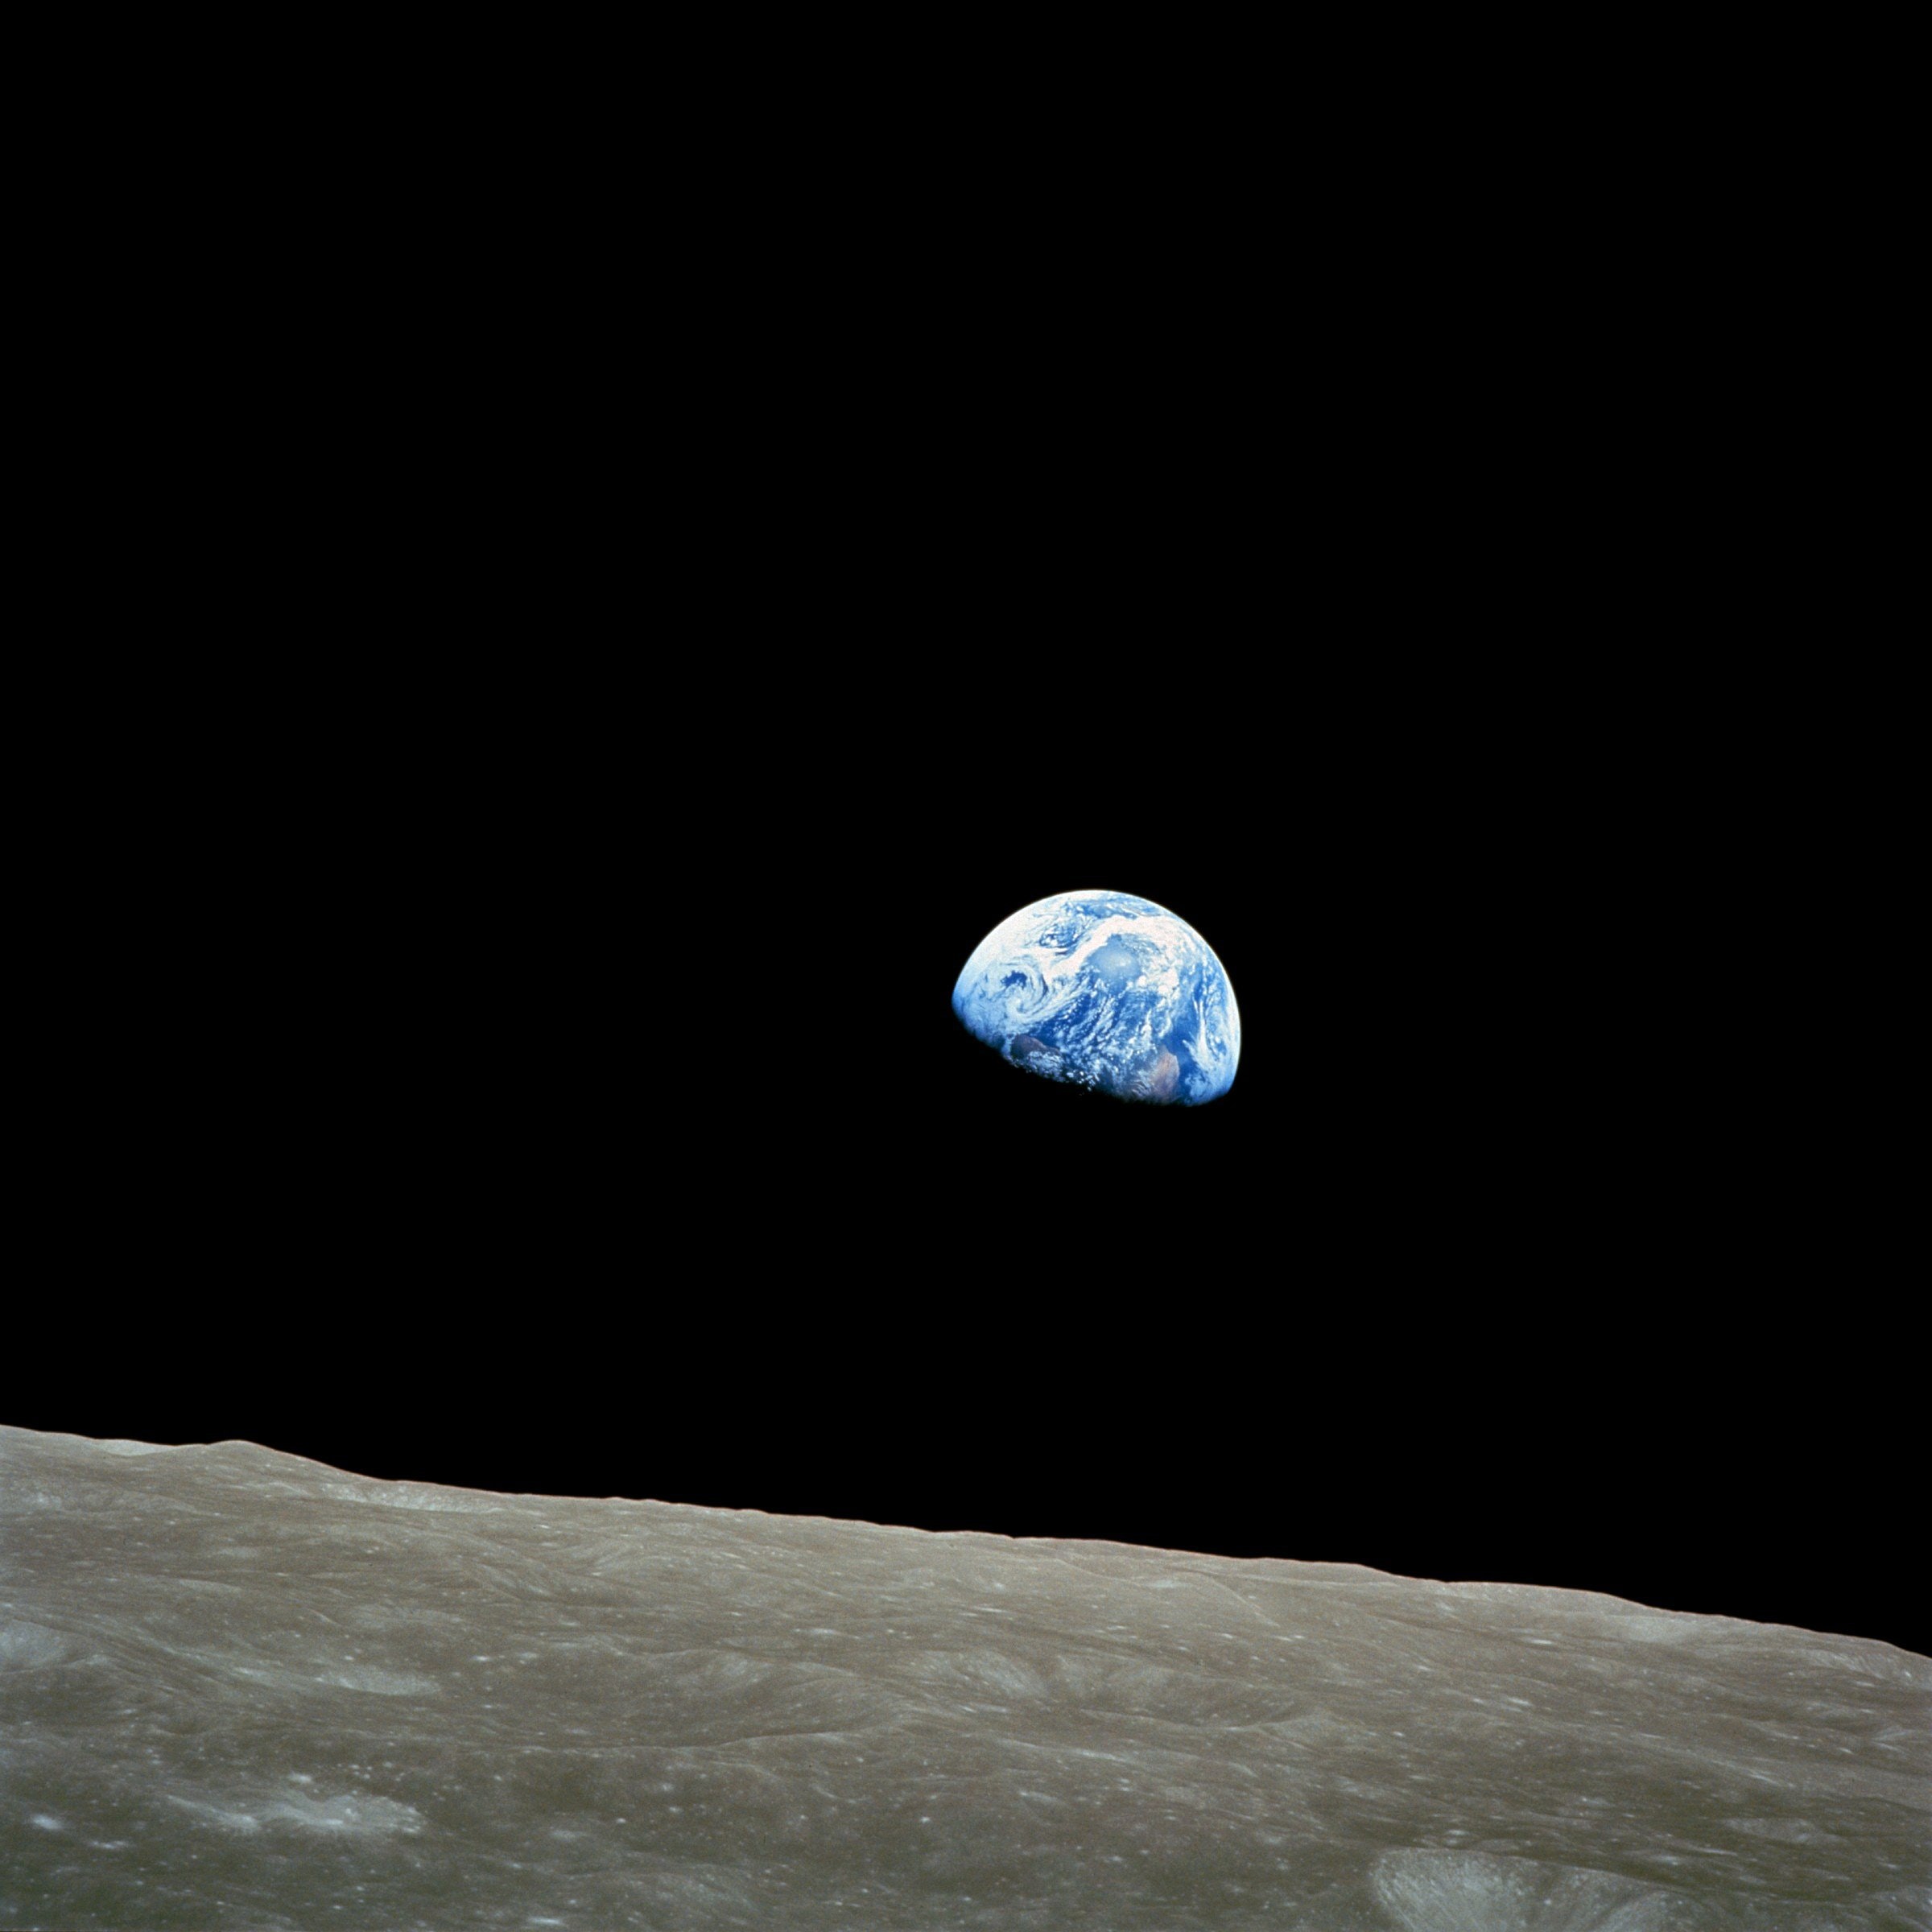 Photo of the earth taken from the moon